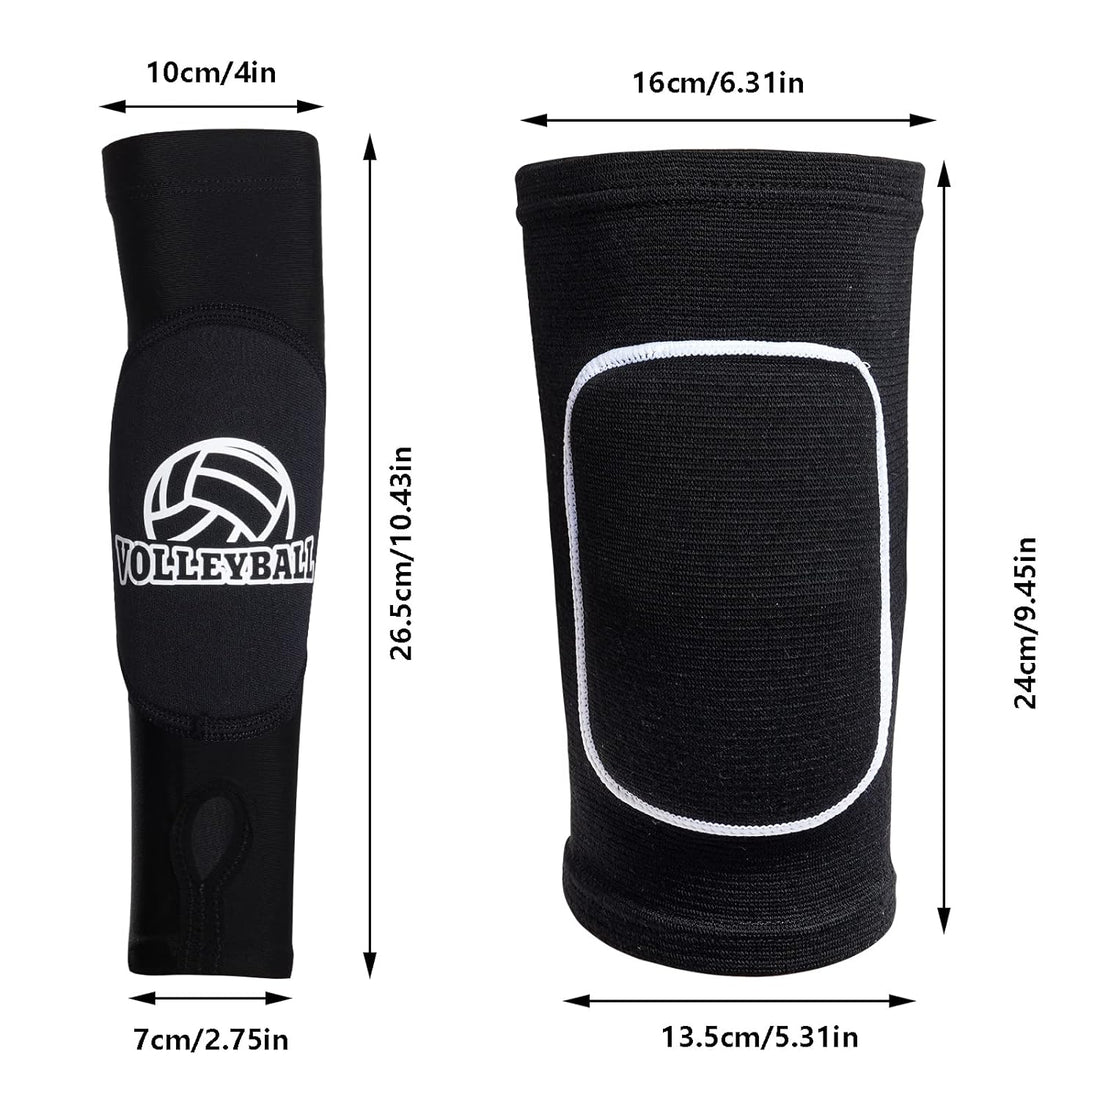 obmwang 2 Pieces Volleyball Accessories Including Volleyball Knee Pads and Volleyball Arm Sleeves with Protection Pads and Thumb Hole for Women Girls Teens Volleyball Training